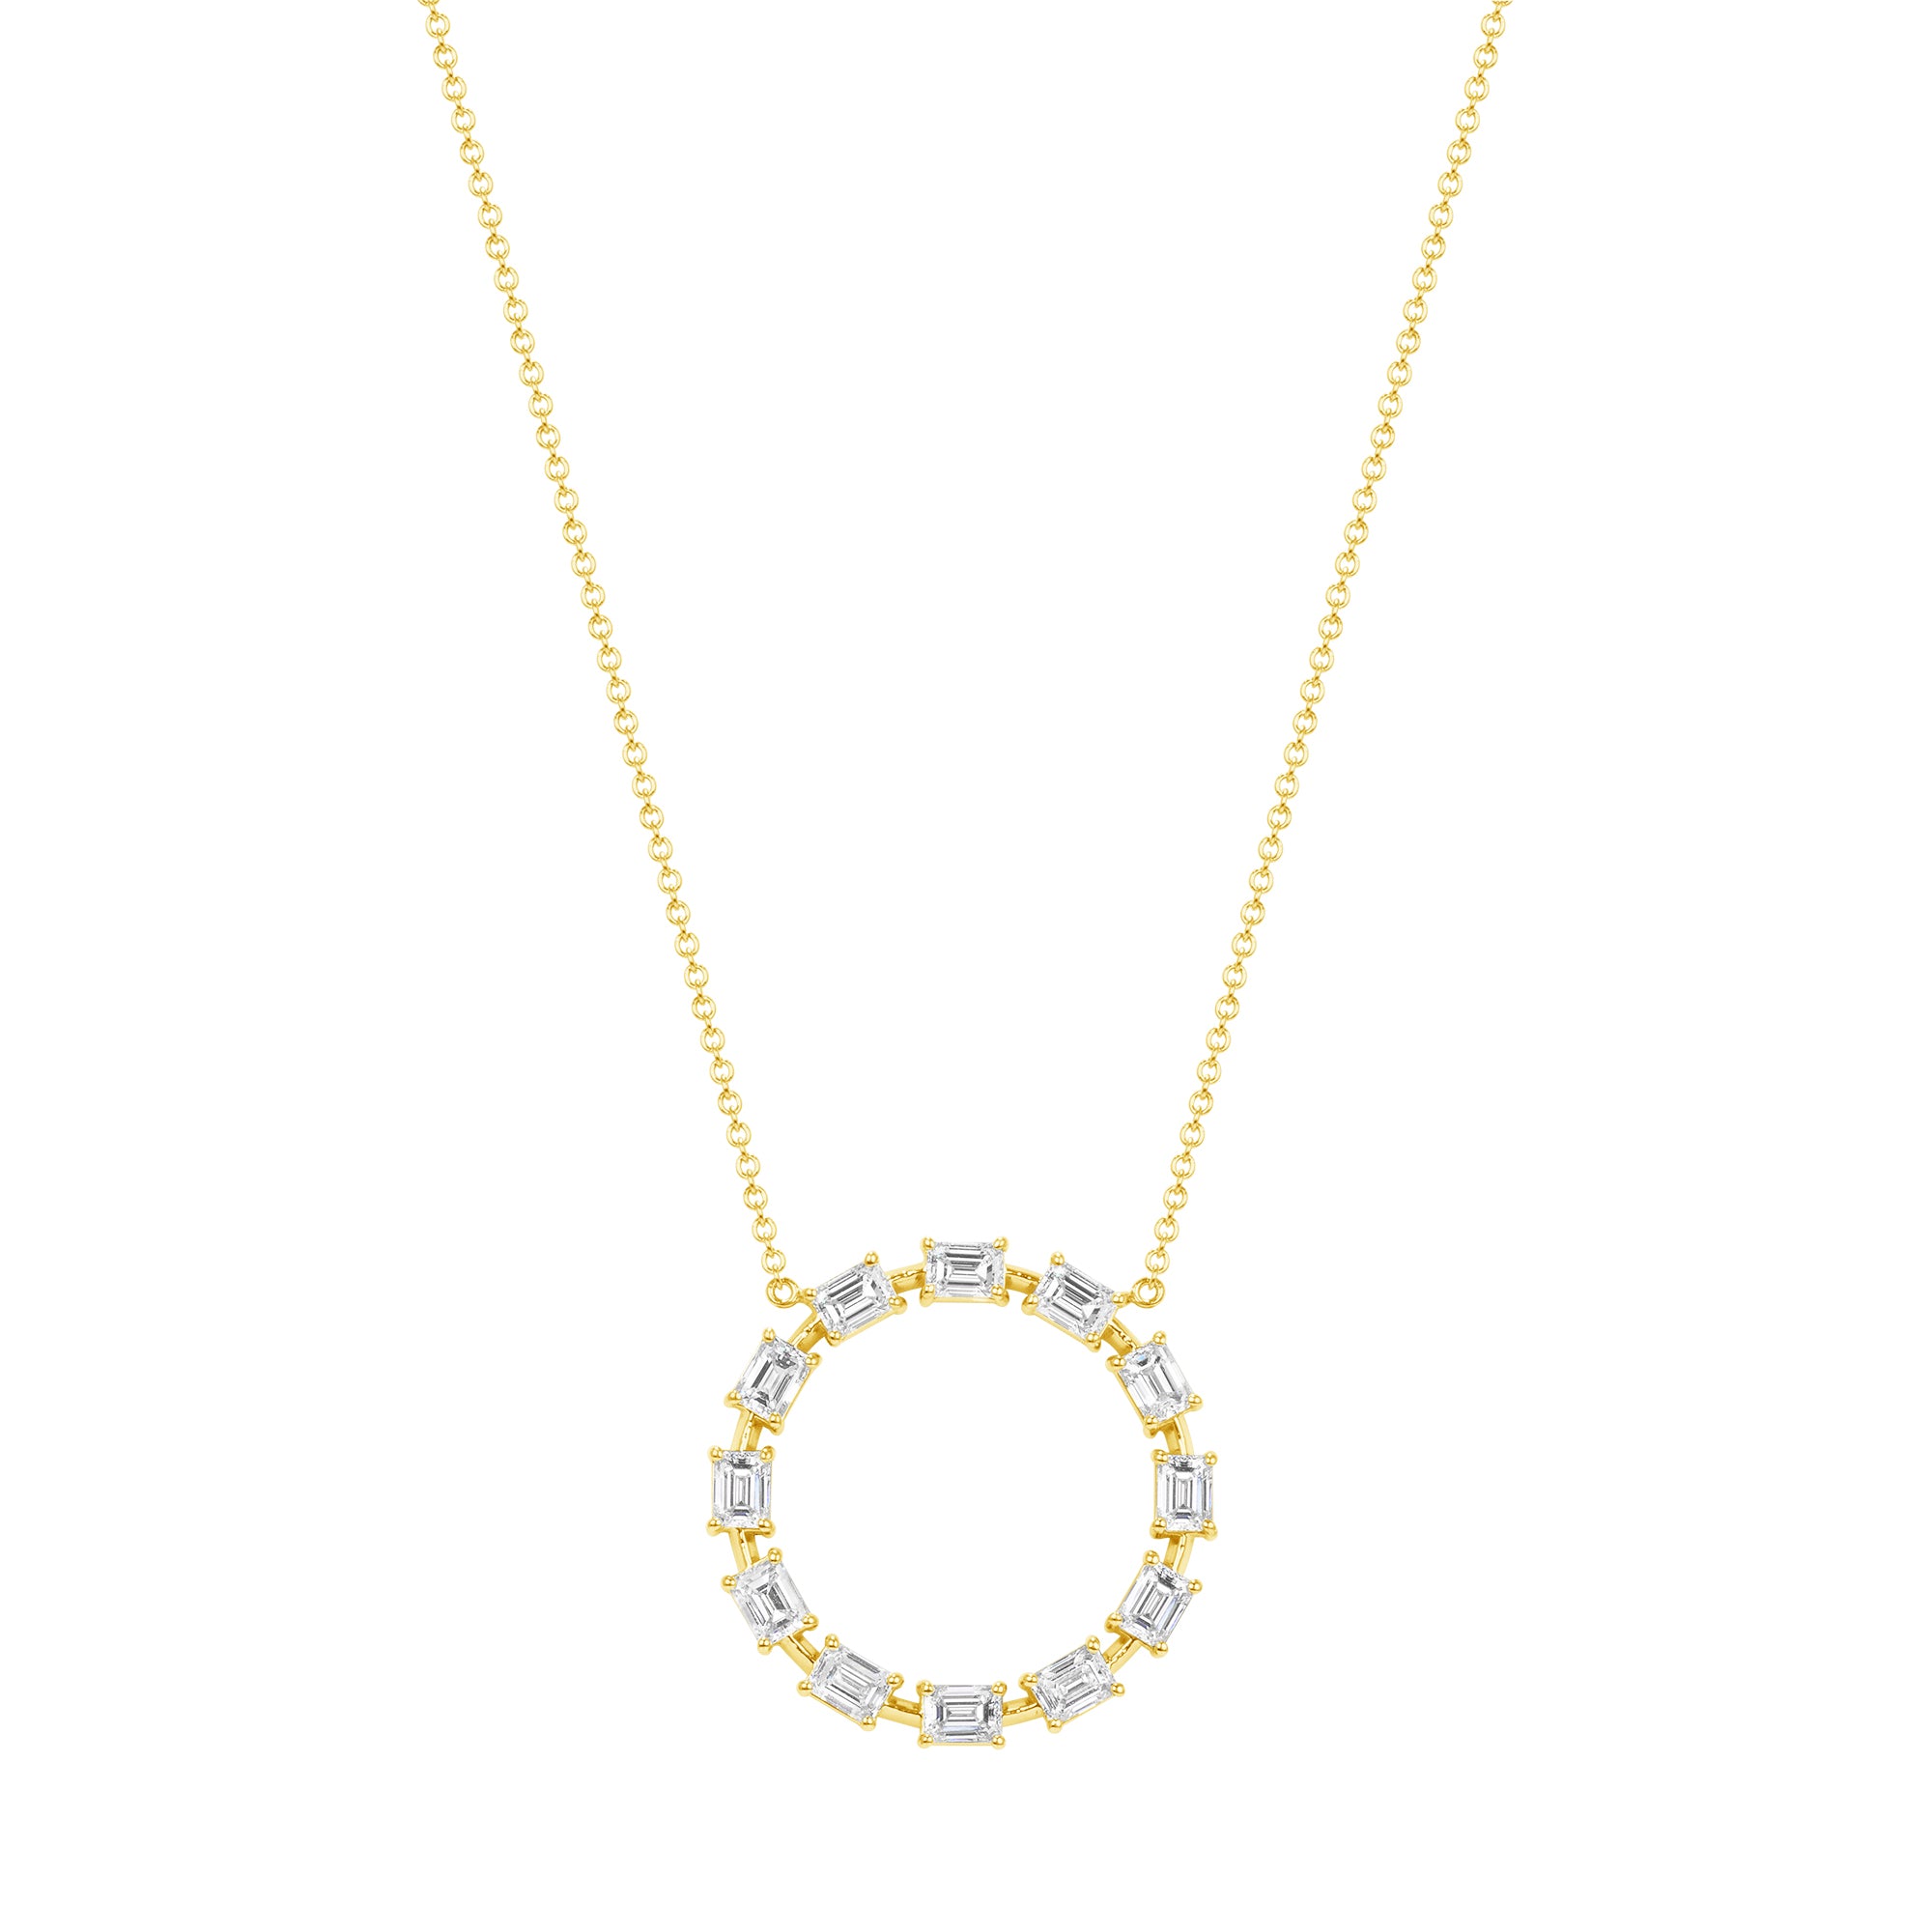 2.27ct. Emerald Cut Diamond Round Pendant Necklace in 18K Yellow Gold